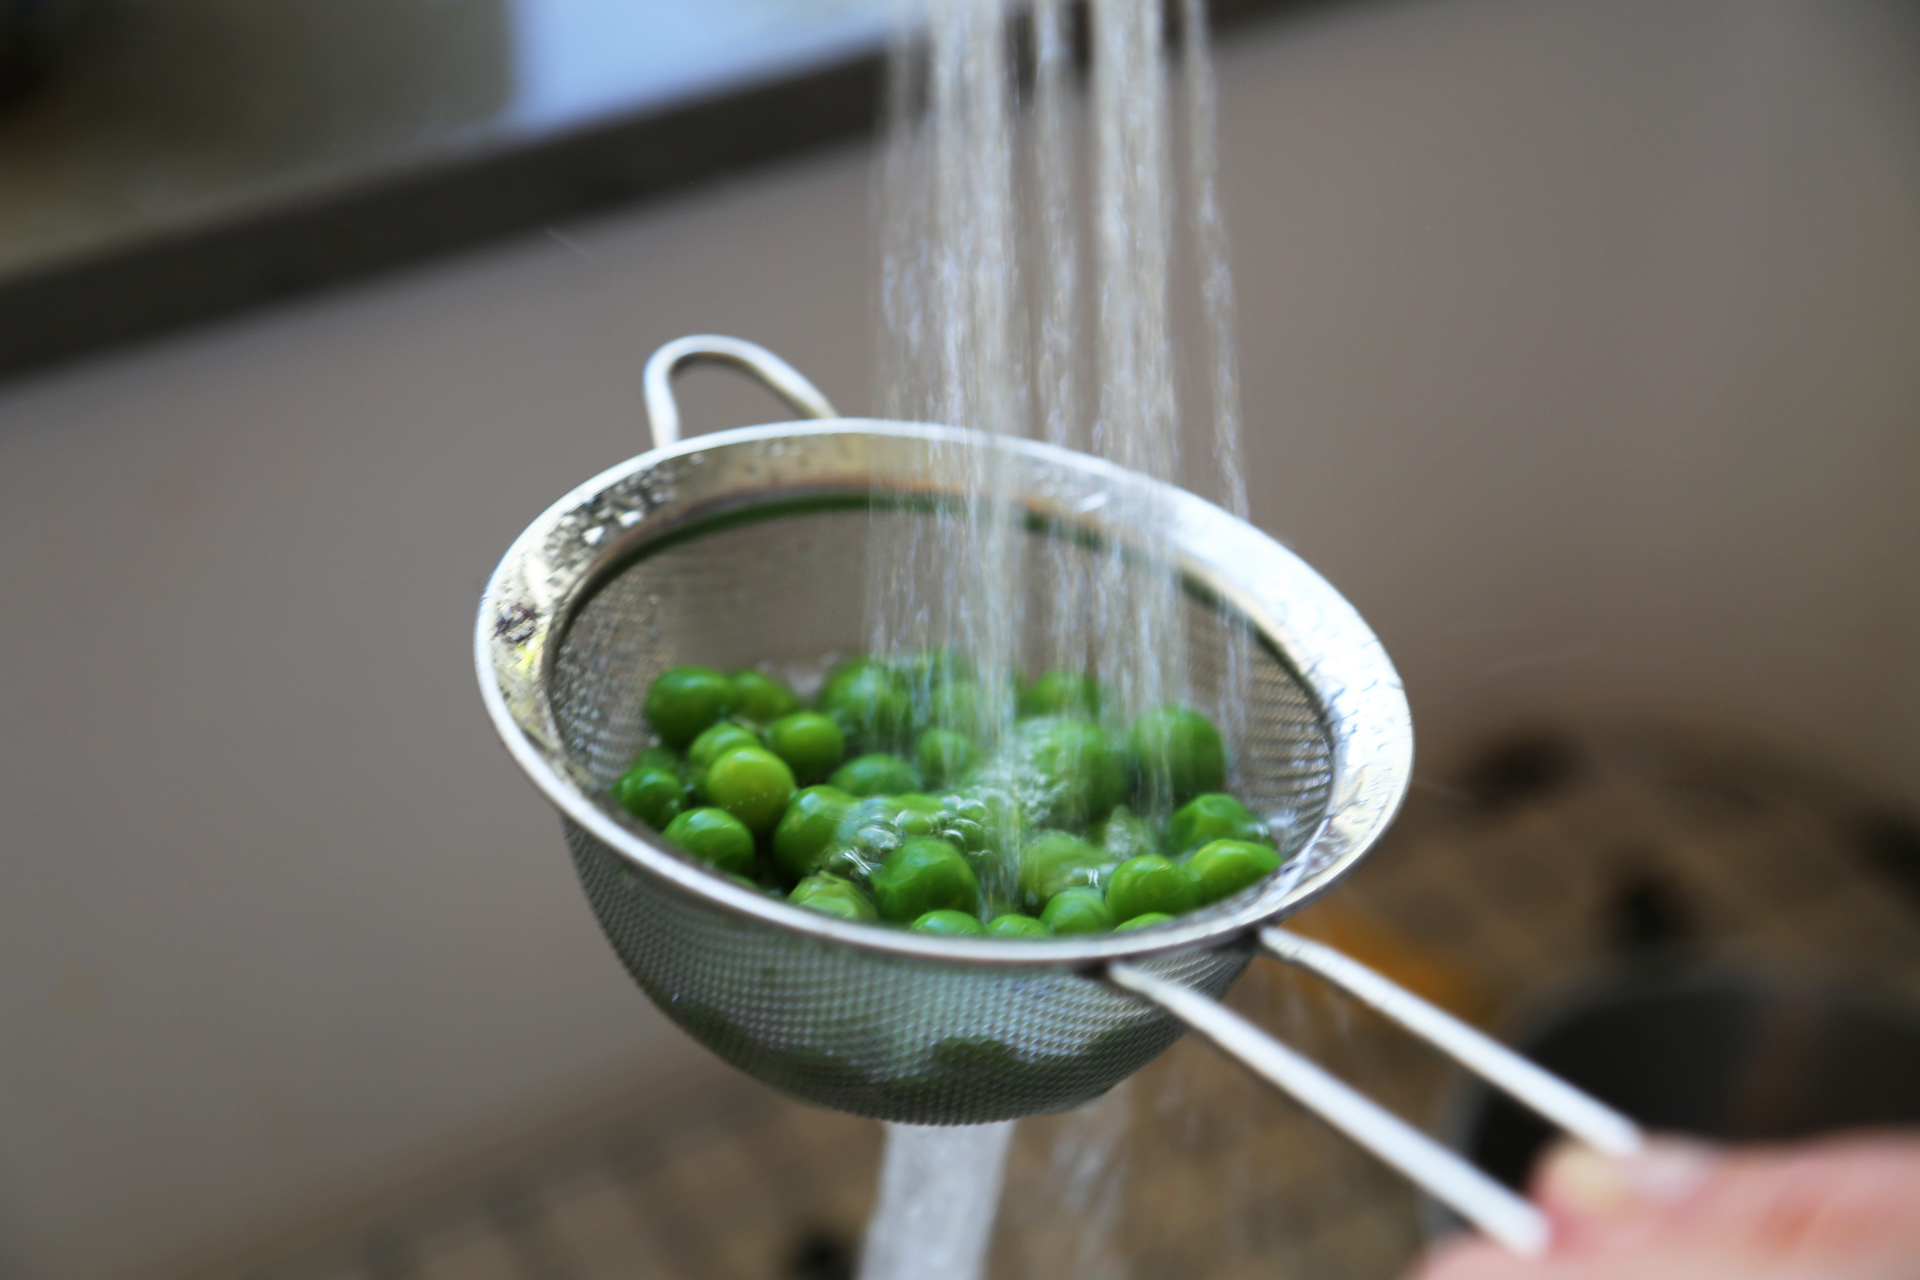 Drain the peas and rinse them under cold water.